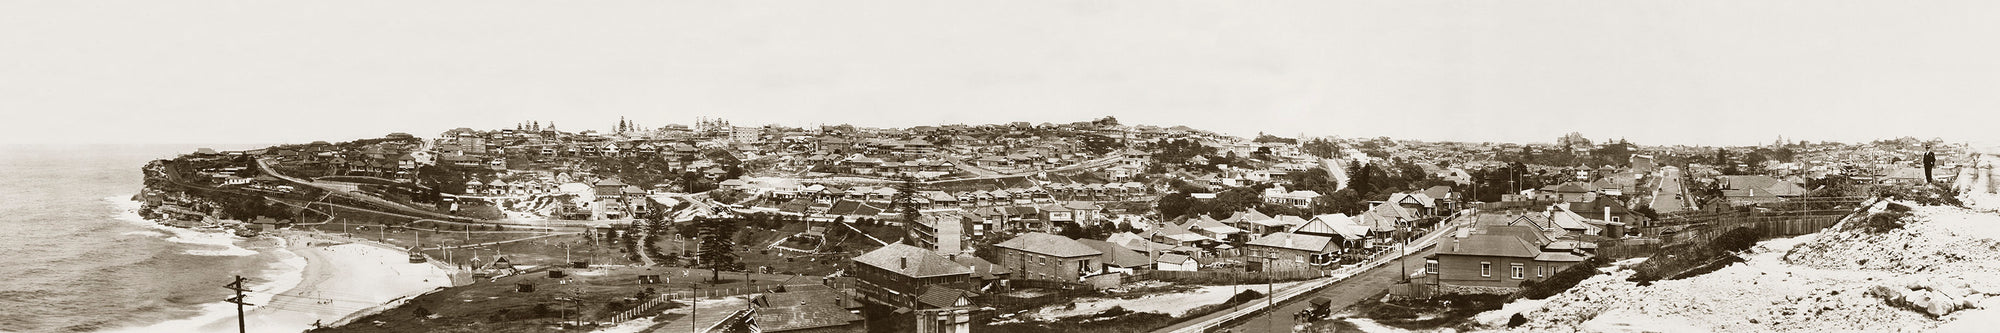 View Of Bronte And The Beach, Bronte NSW Australia 1927